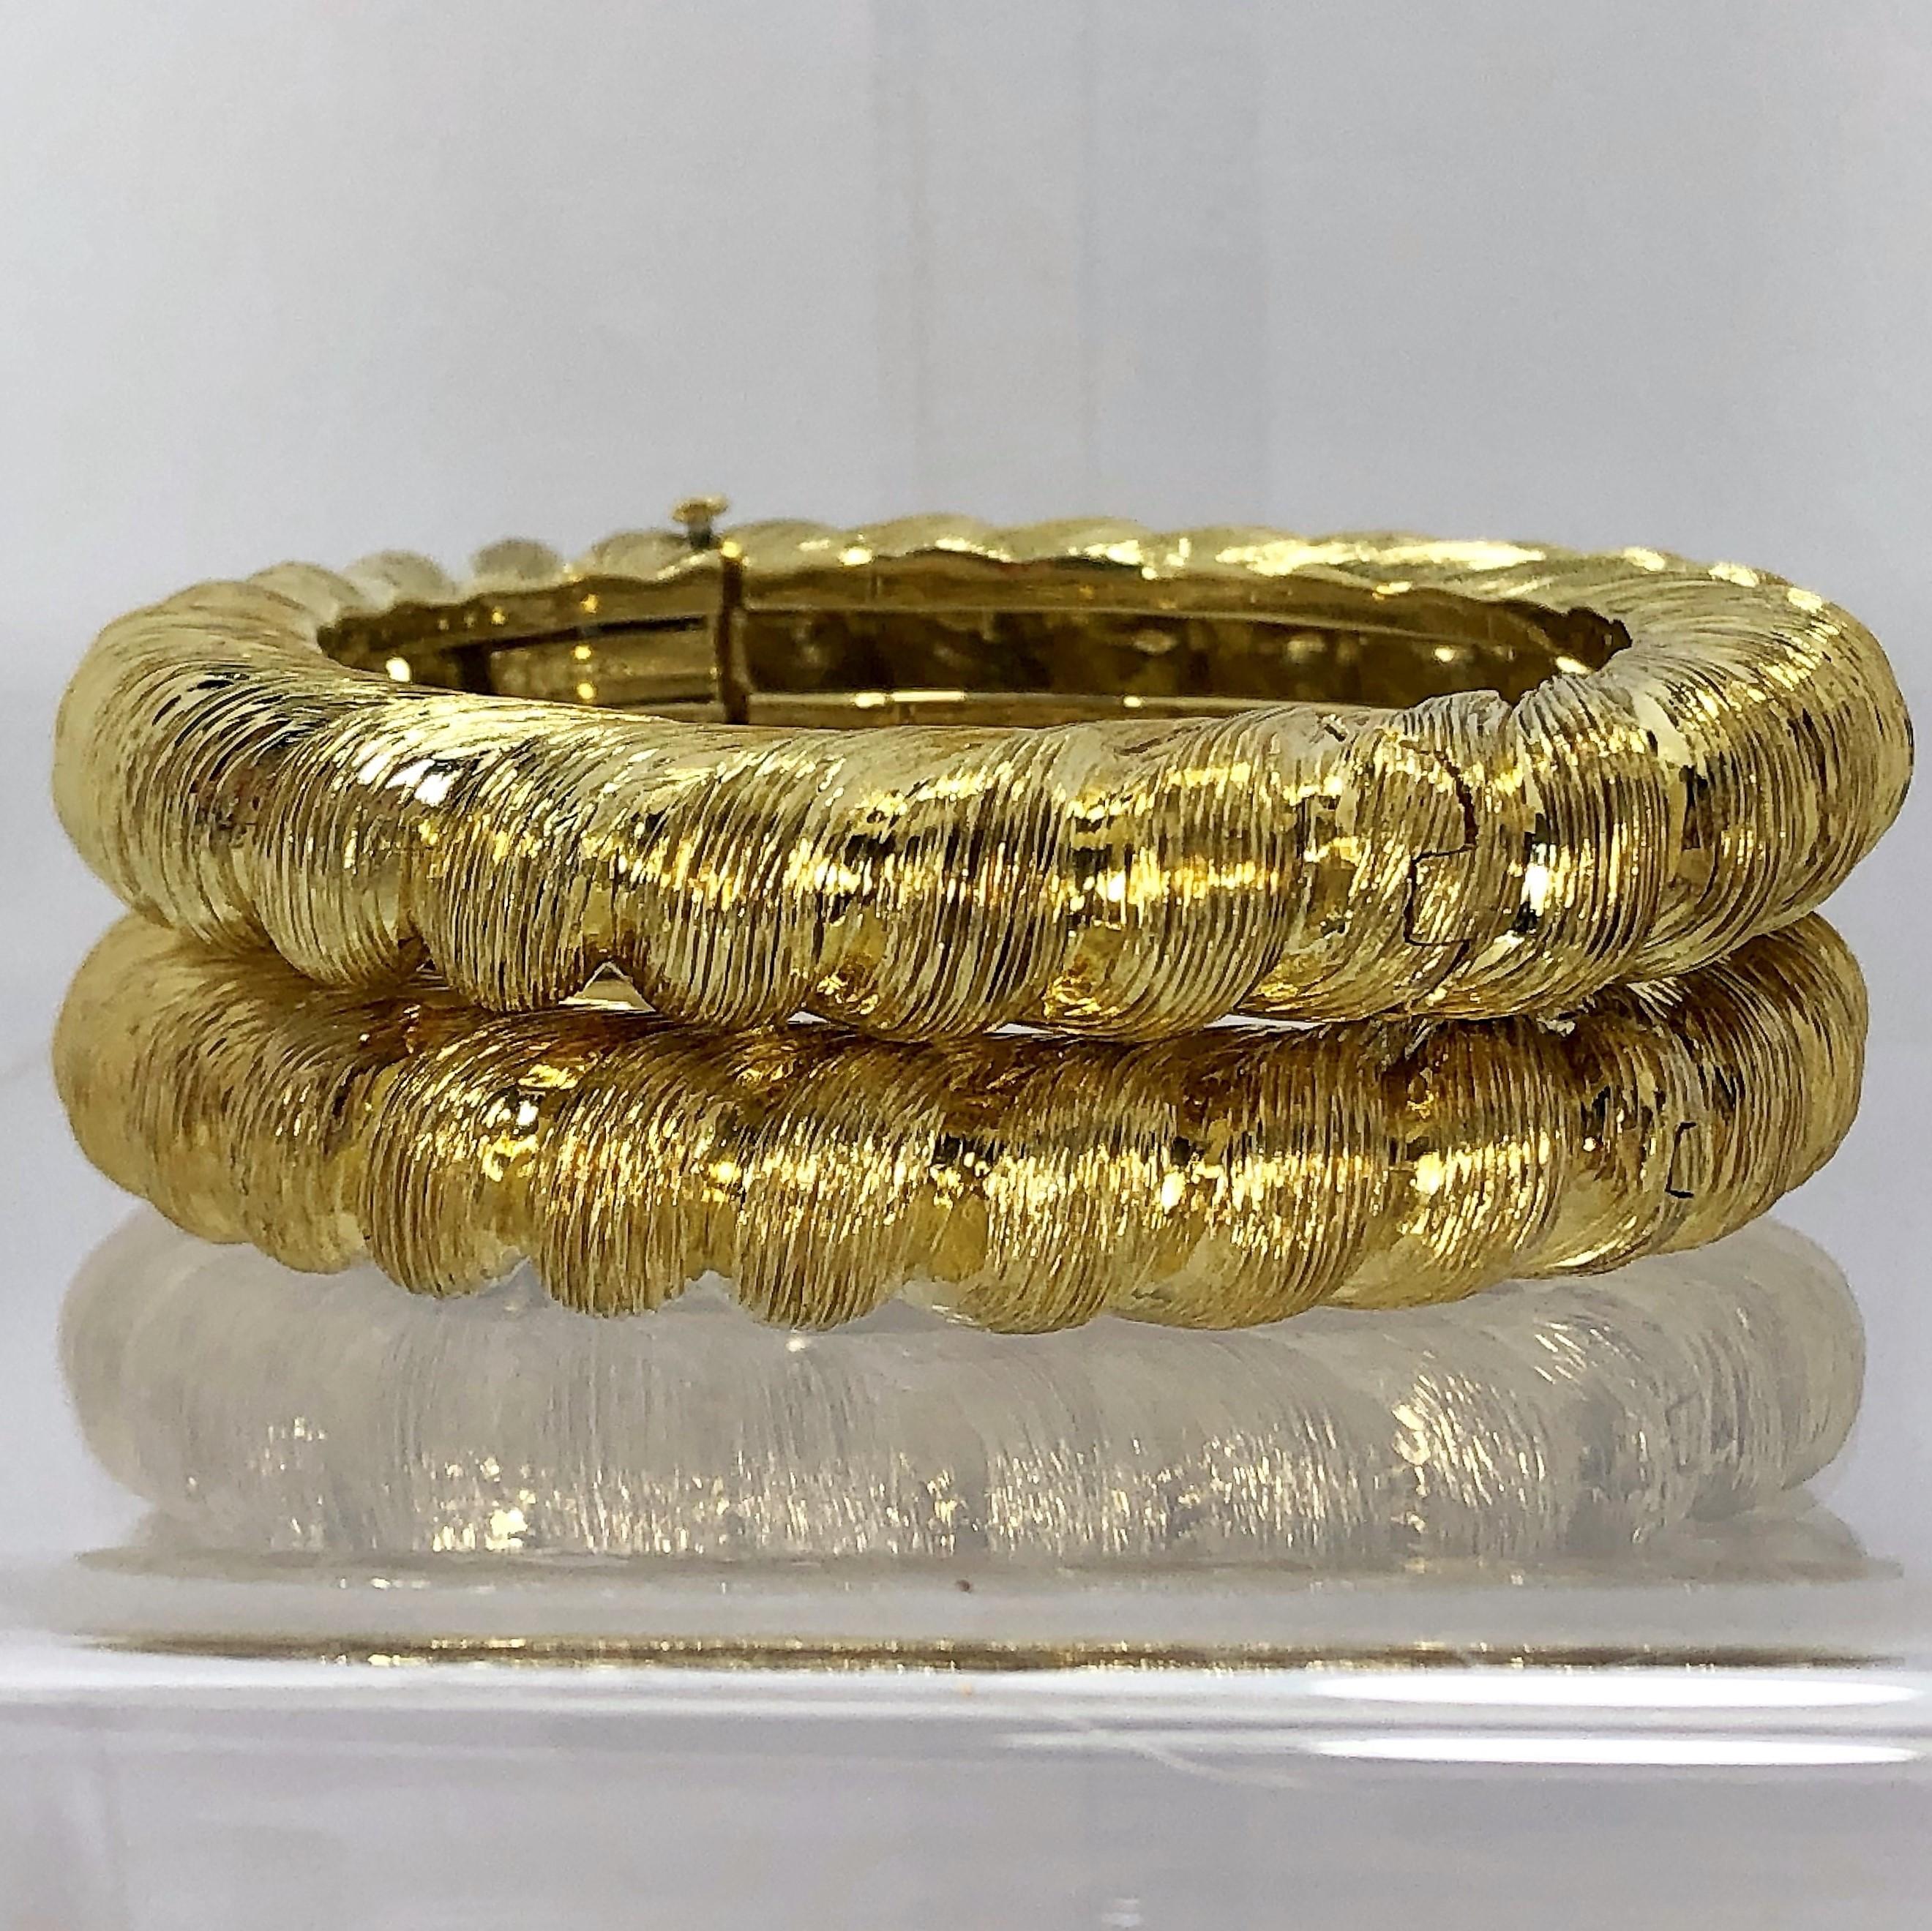 A matched pair of 18K yellow gold, 
bangle bracelets by Tiffany &Co.,
featuring a twisted rope design.
Can be worn individually or stacked 
as shown. Hinged on one side. Signed Tiffany and Co. 18k. Fits a small wrist 
size. Measuring 7/8 inch wide